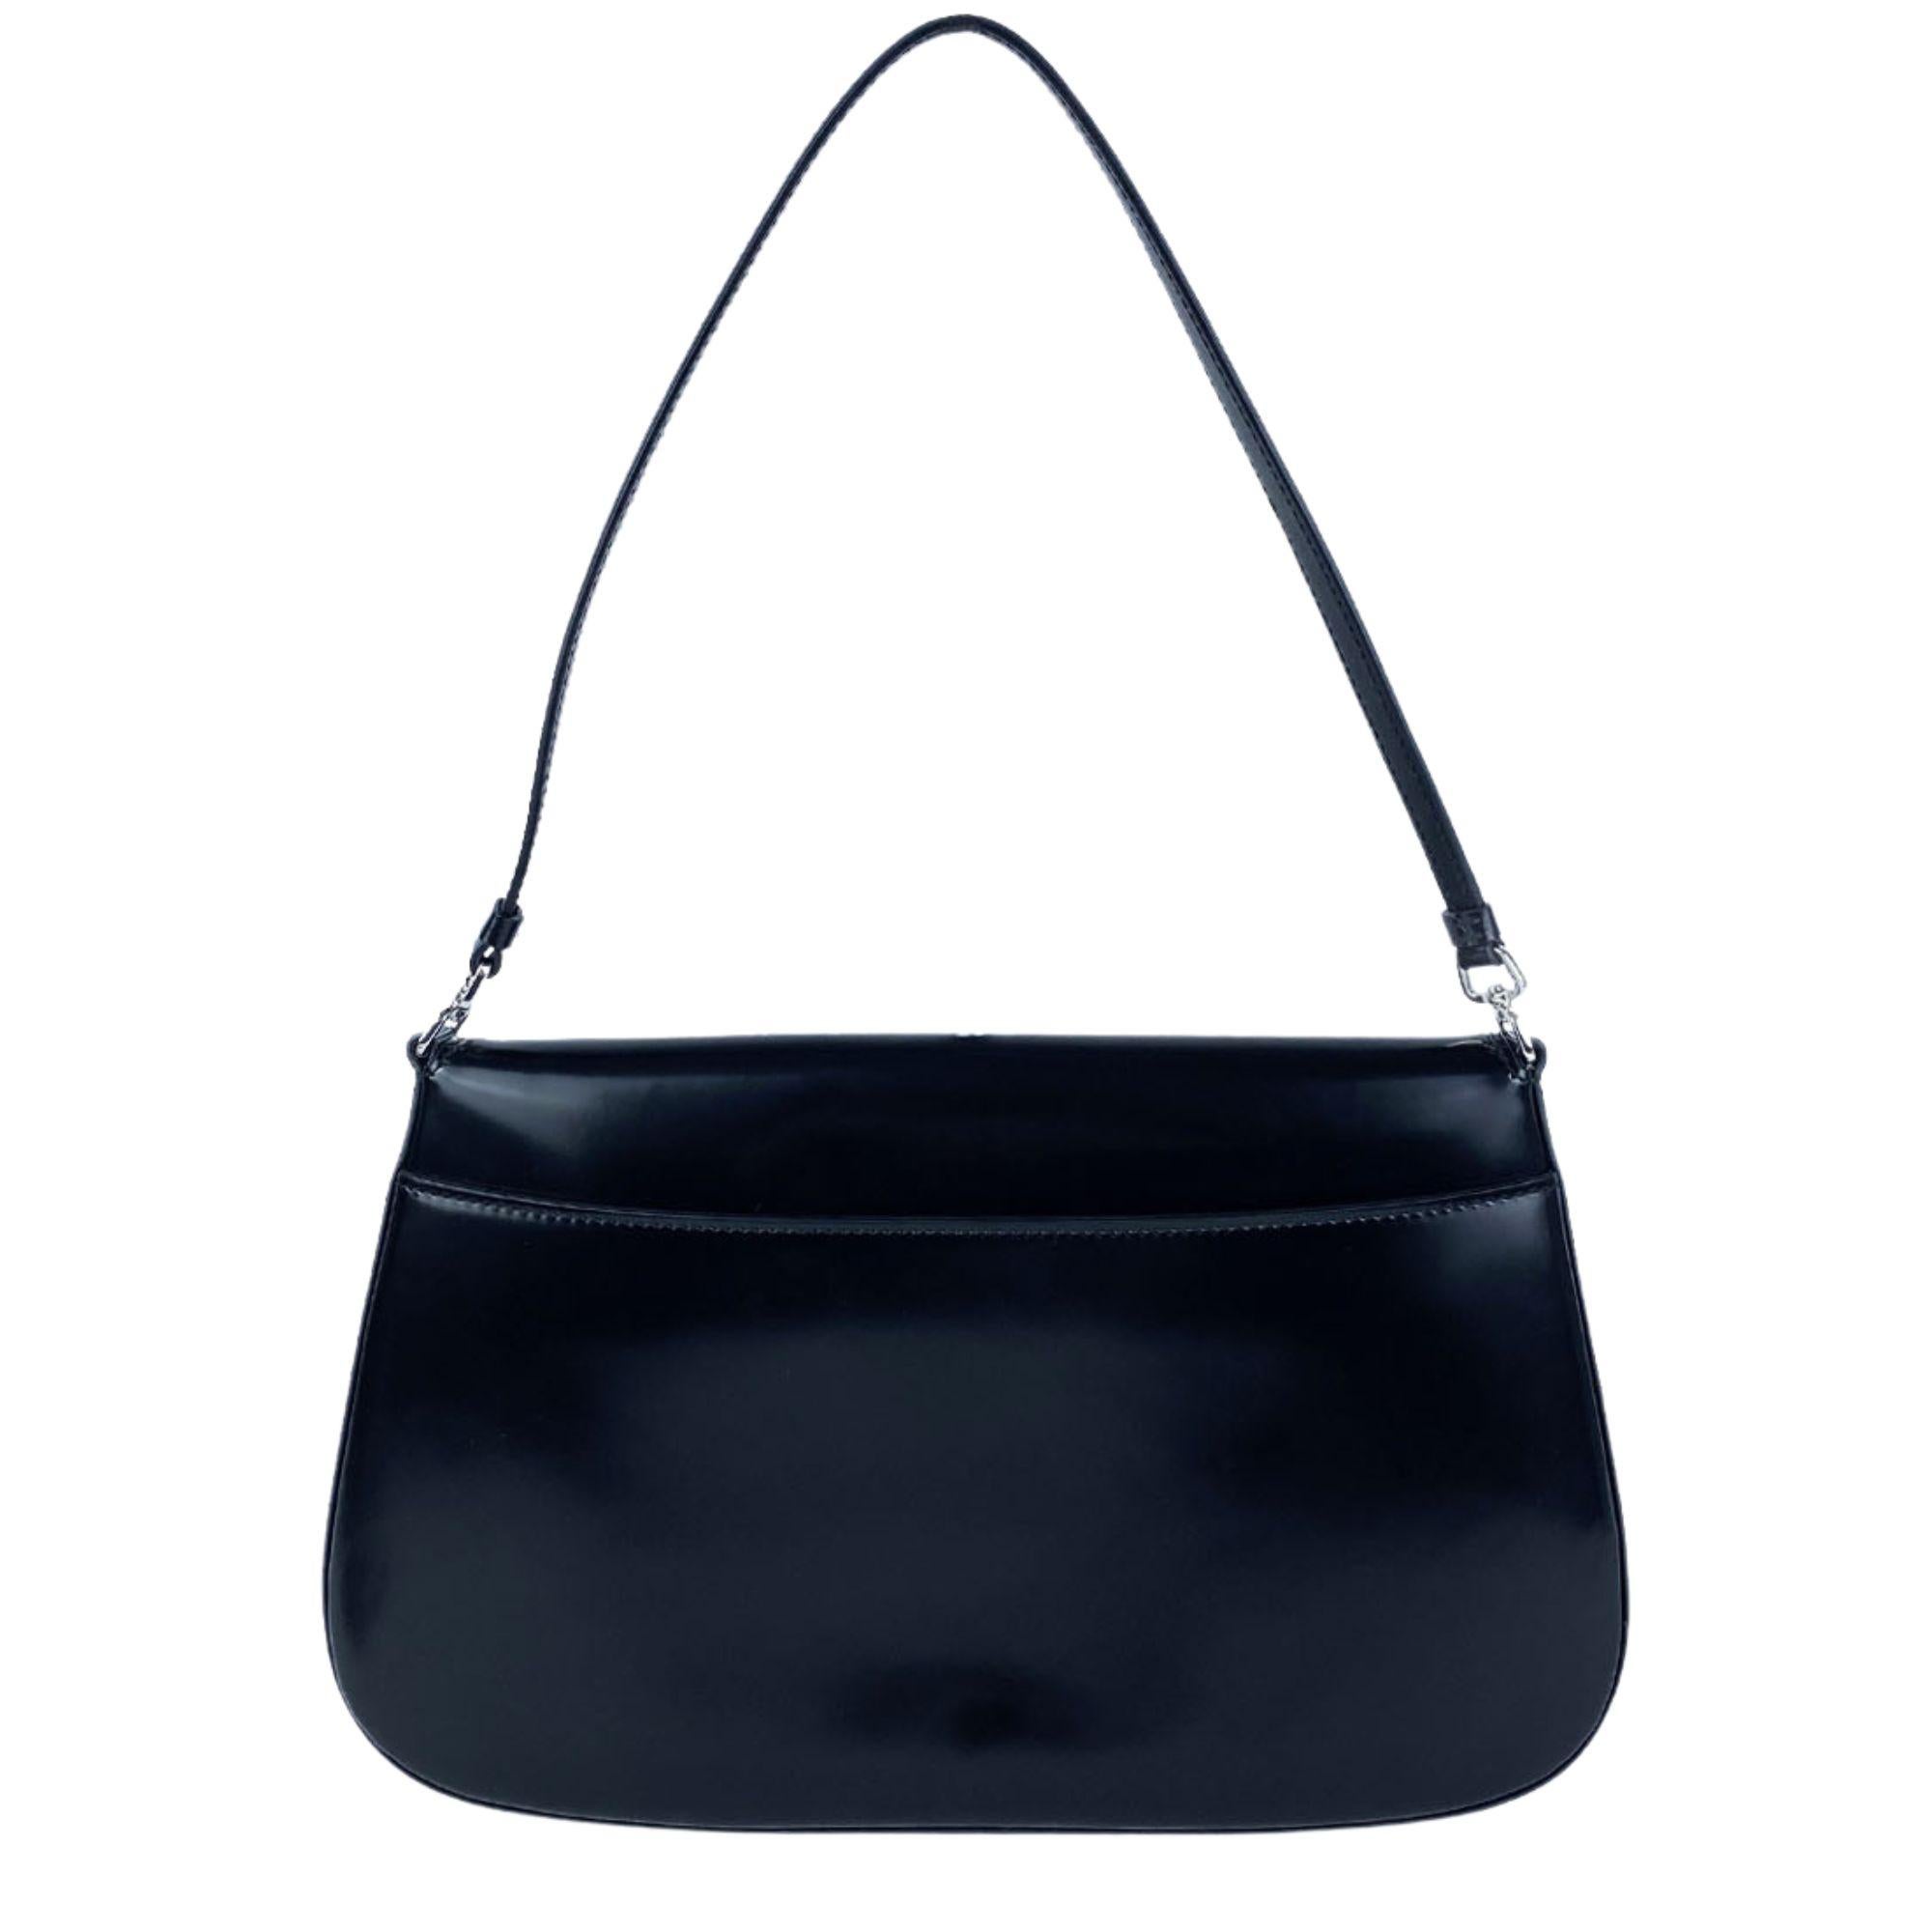 Prada New Black Brushed Leather Cleo Flap Shoulder Bag.  Silver hardware. Prada logo plaque at front flap. Open to a leather canvas interior with large side pocket. Perfect bag for day or night.

Material: Leather
Hardware: Silver